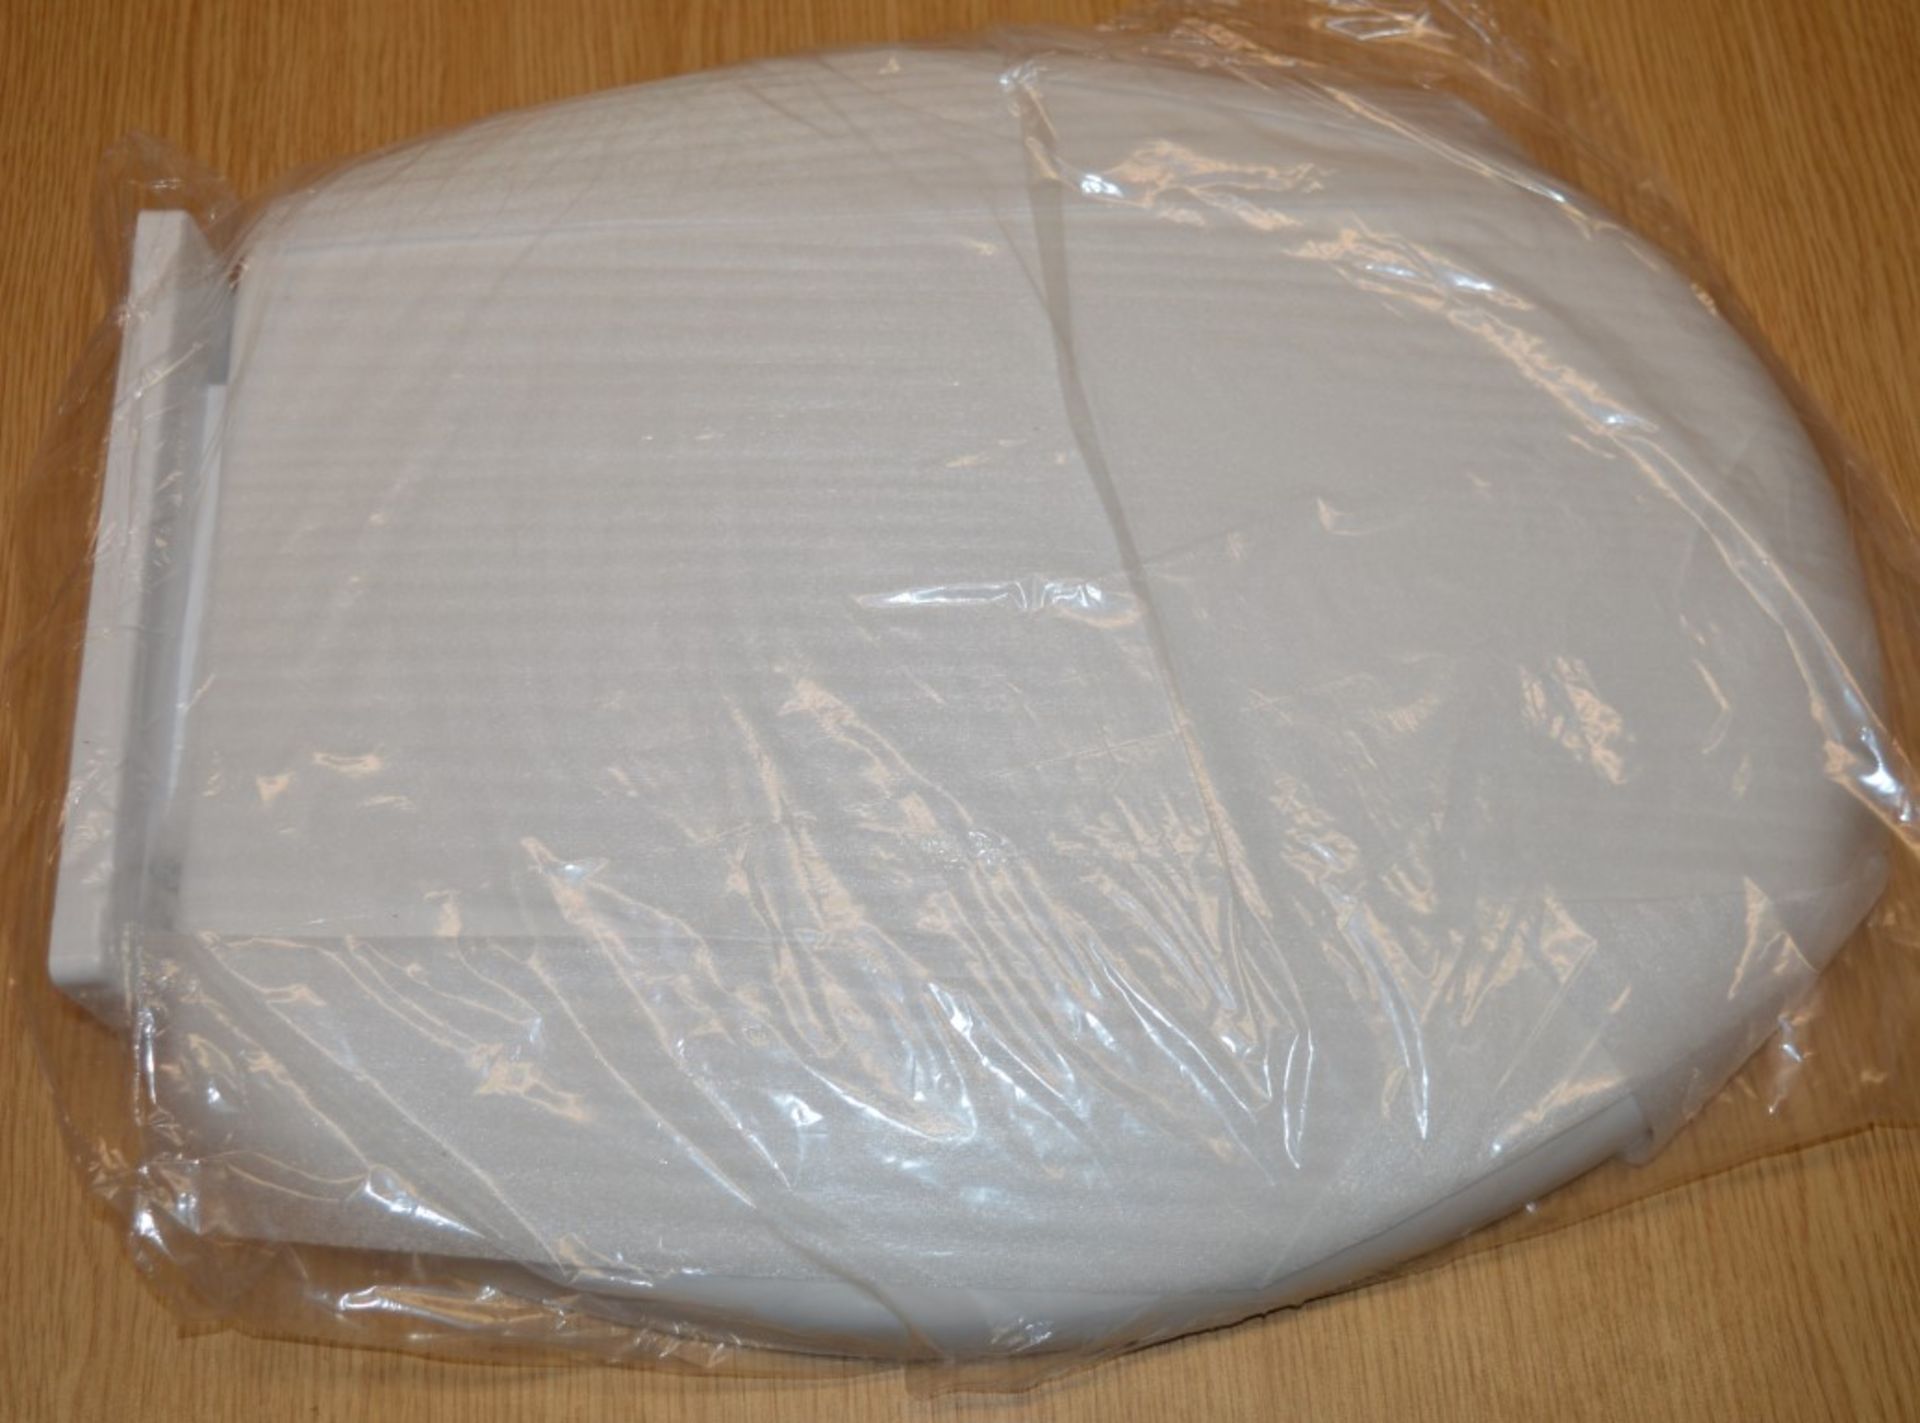 6 x Soft Close COMFORT Toilet Seats - Brand New Boxed Stock - CL034 - Ideal For Resale - Vogue - Image 5 of 7